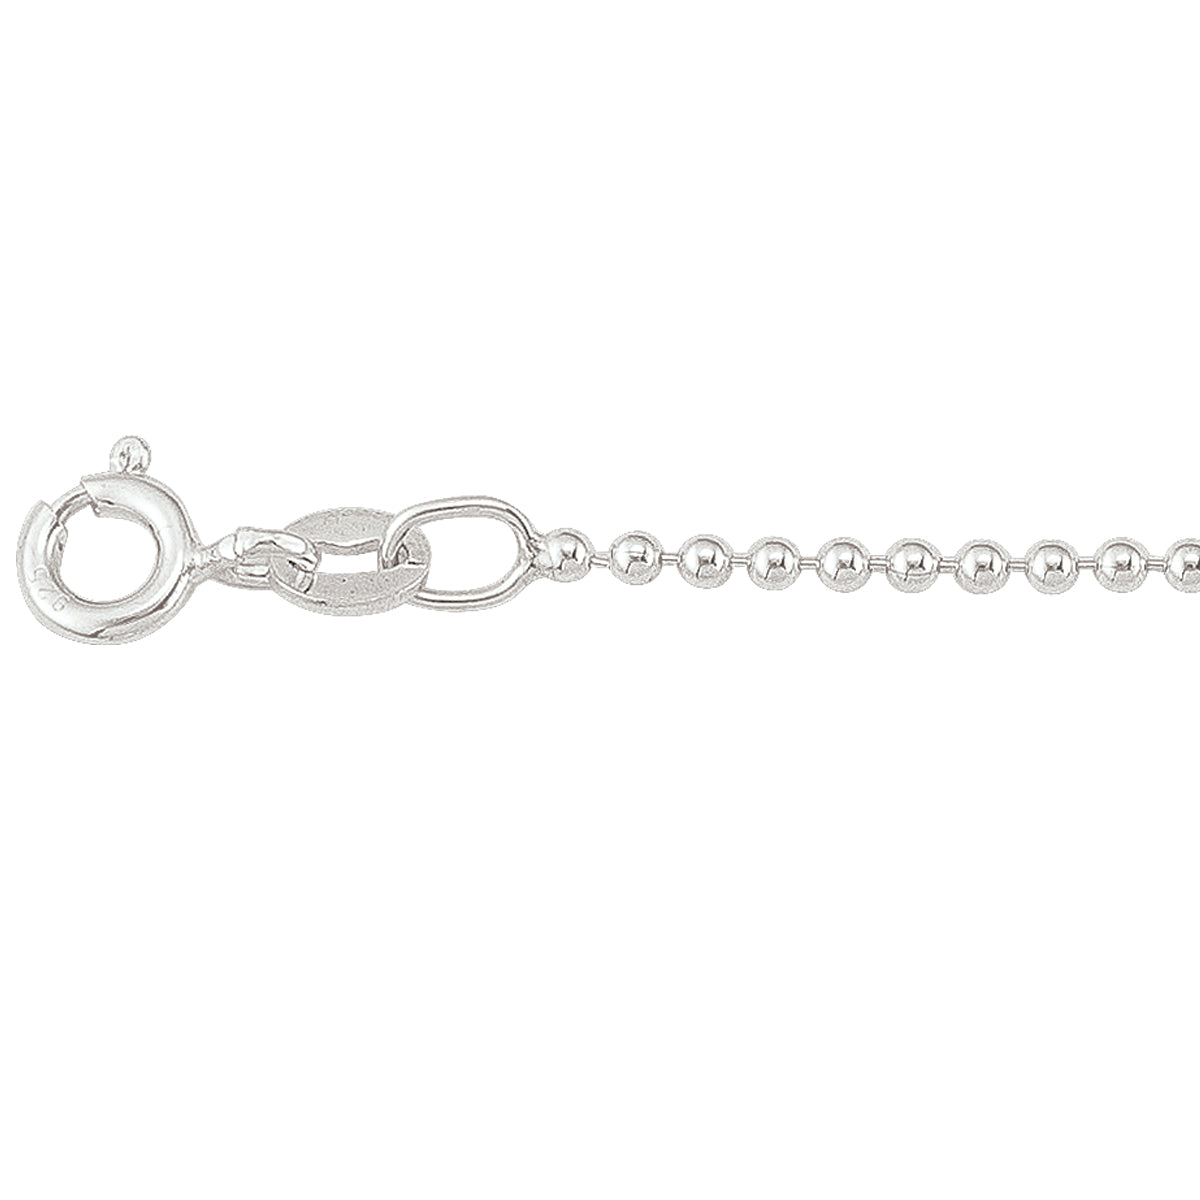 CHAINS SILVER BEAD LINK 